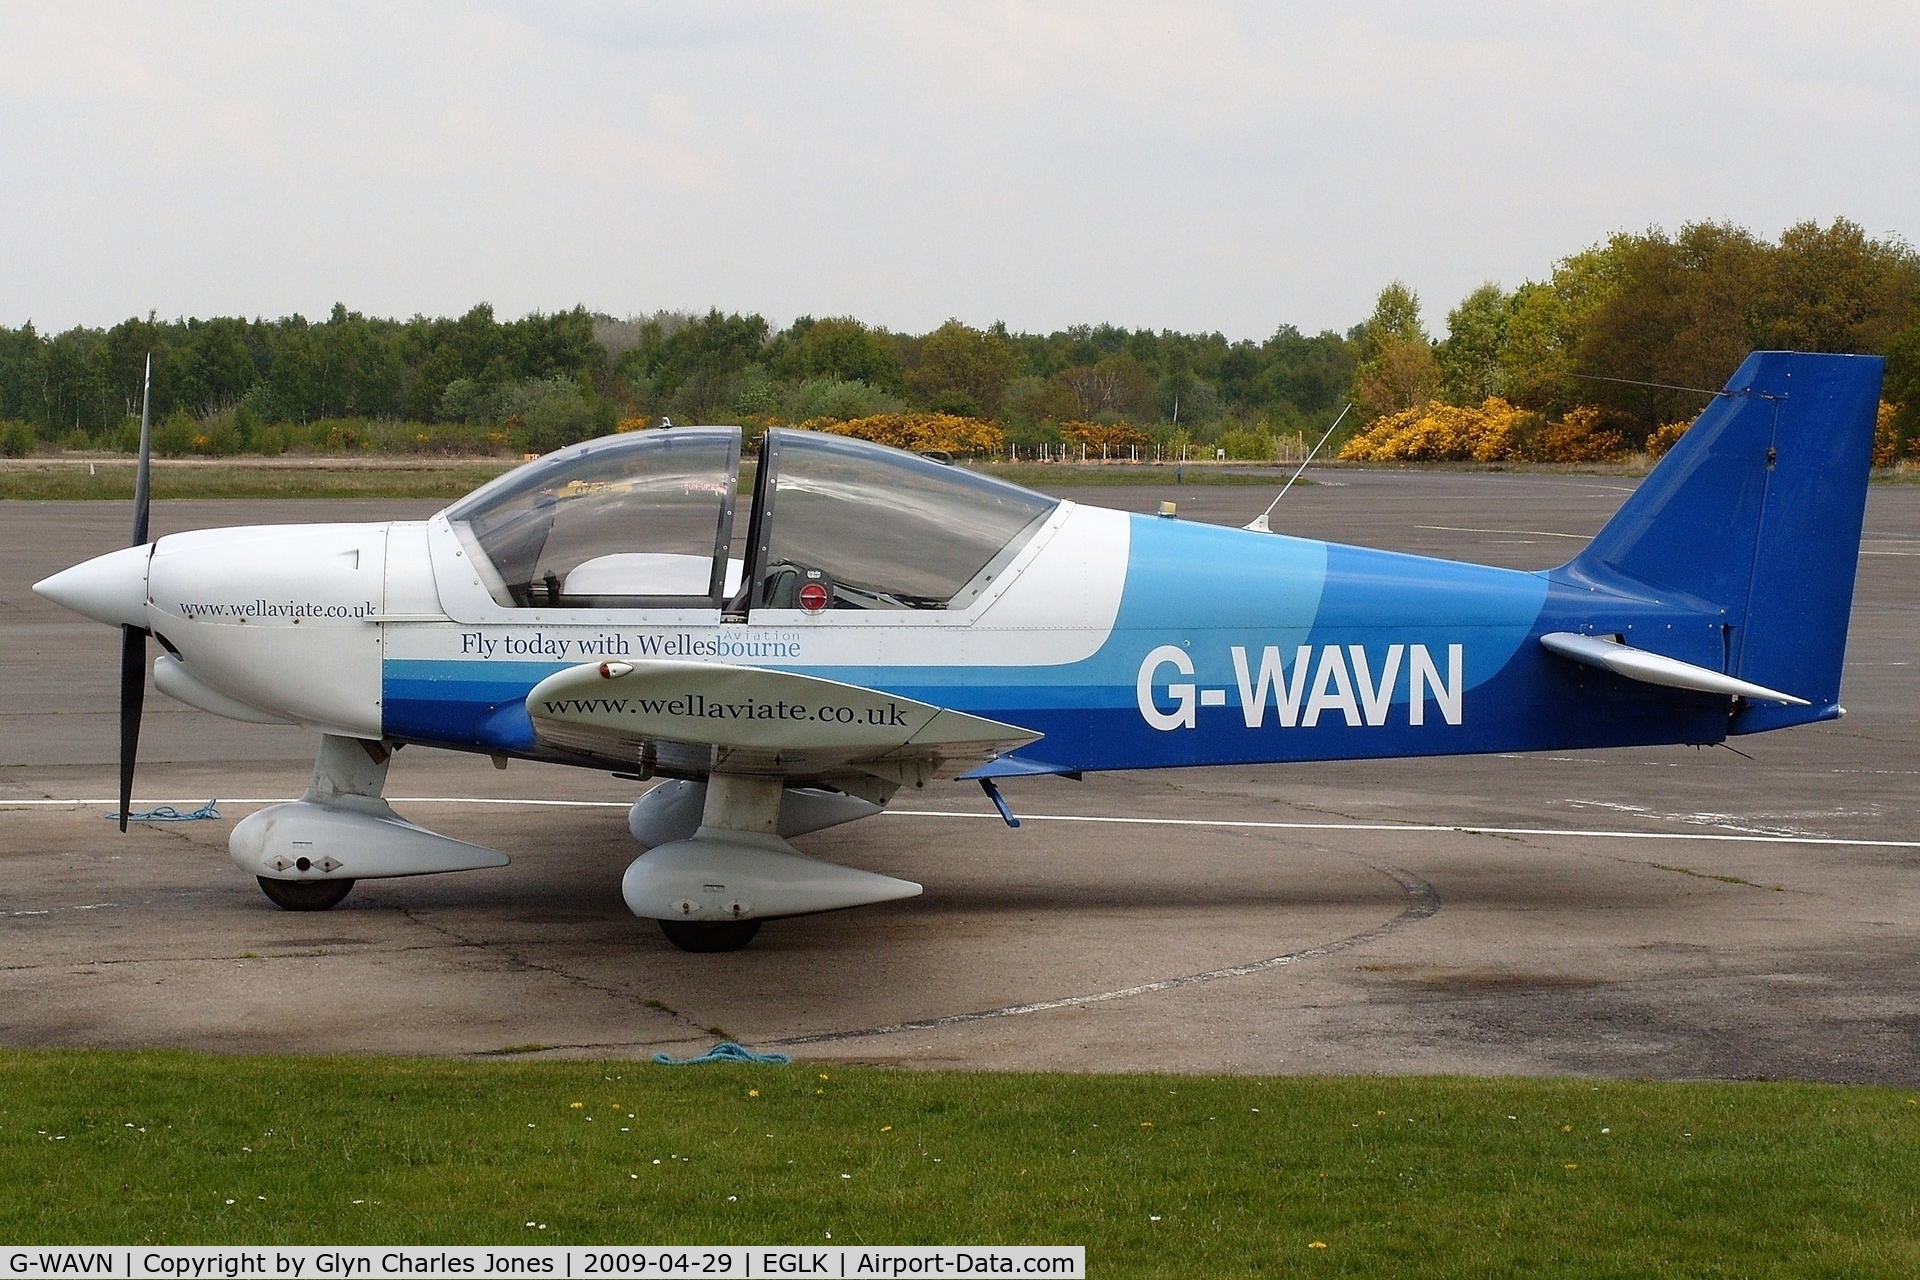 G-WAVN, 2000 Robin HR-200-120B C/N 344, Previously G-VECA. Owned by Wellesbourne Aviation.